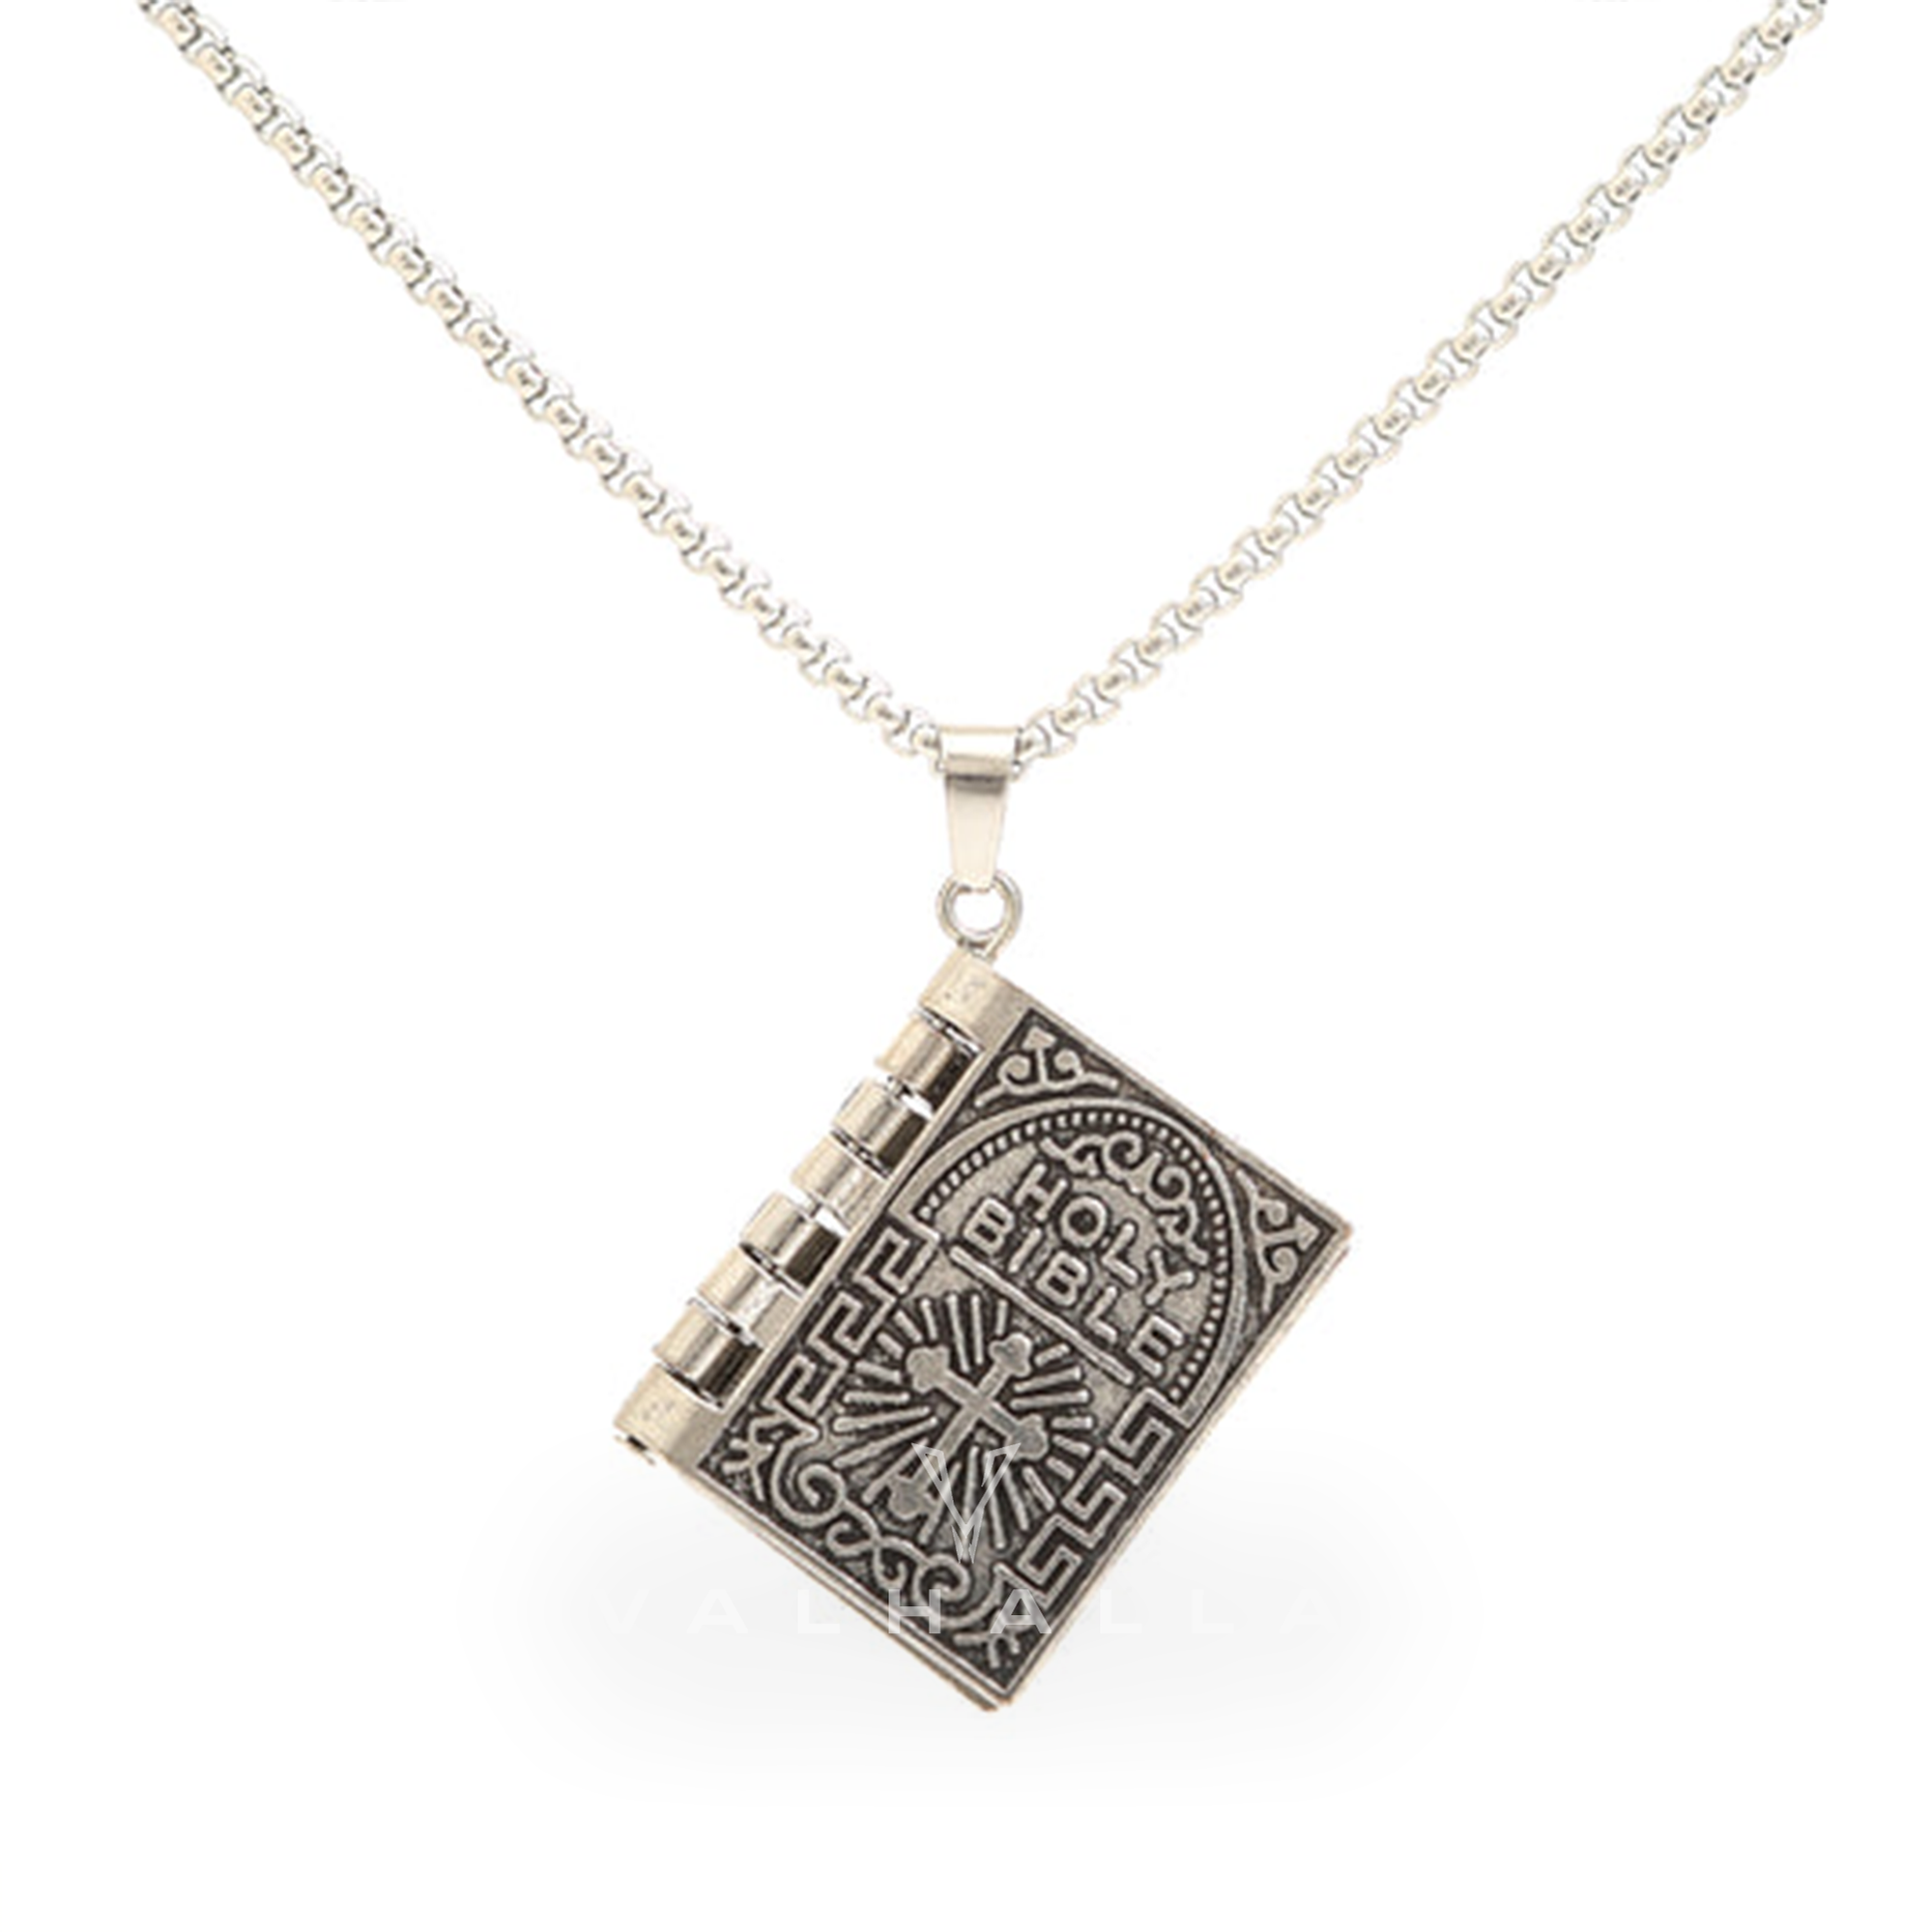 The Holy Bible Pendant & Chain